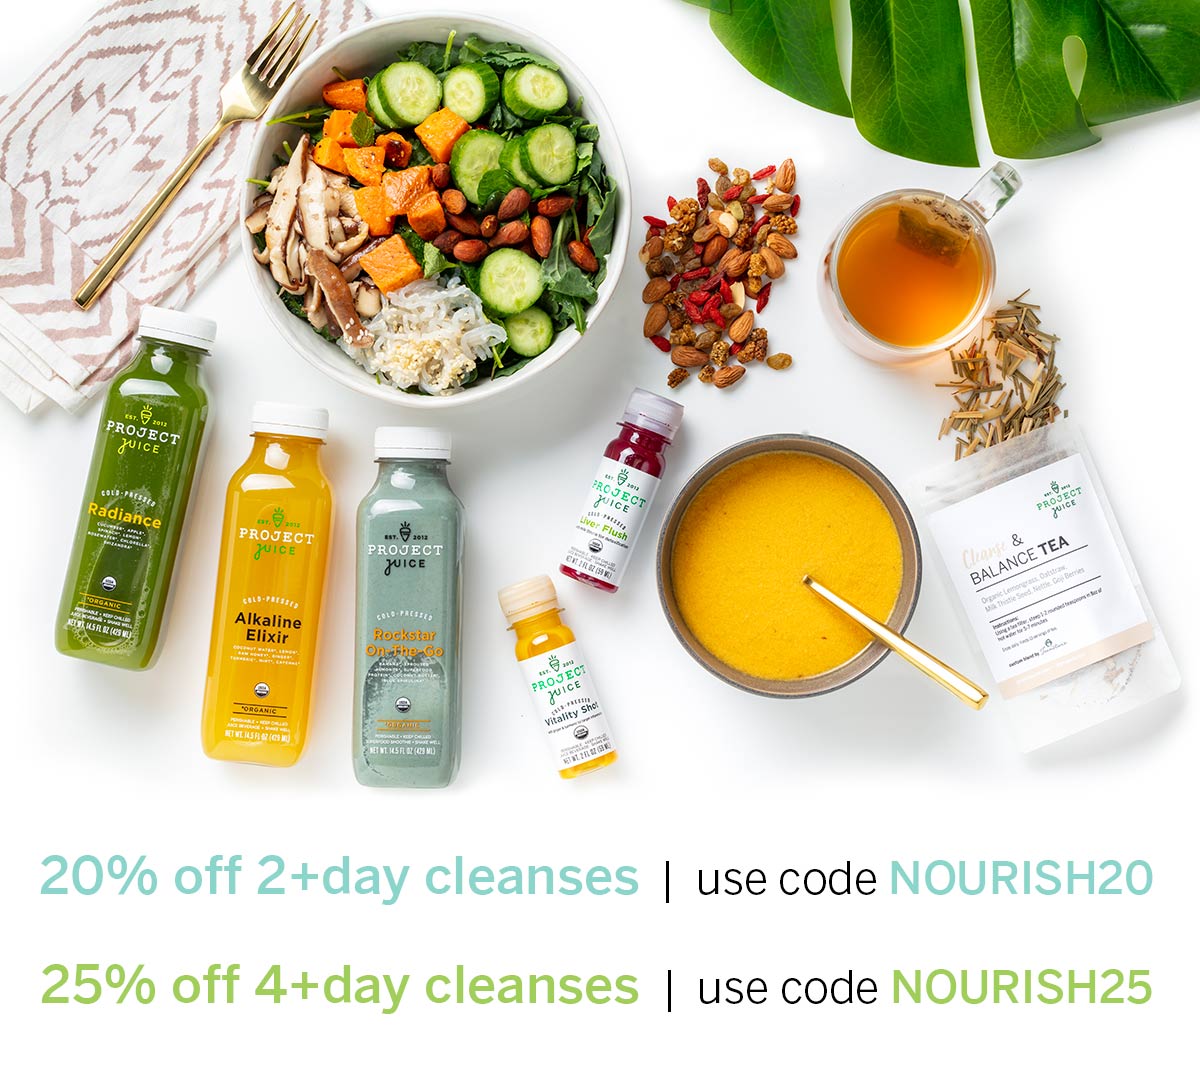 20% off 2+Day Cleanses use code NOURISH20 | 25% off 4+Day Cleanses use code NOURISH25